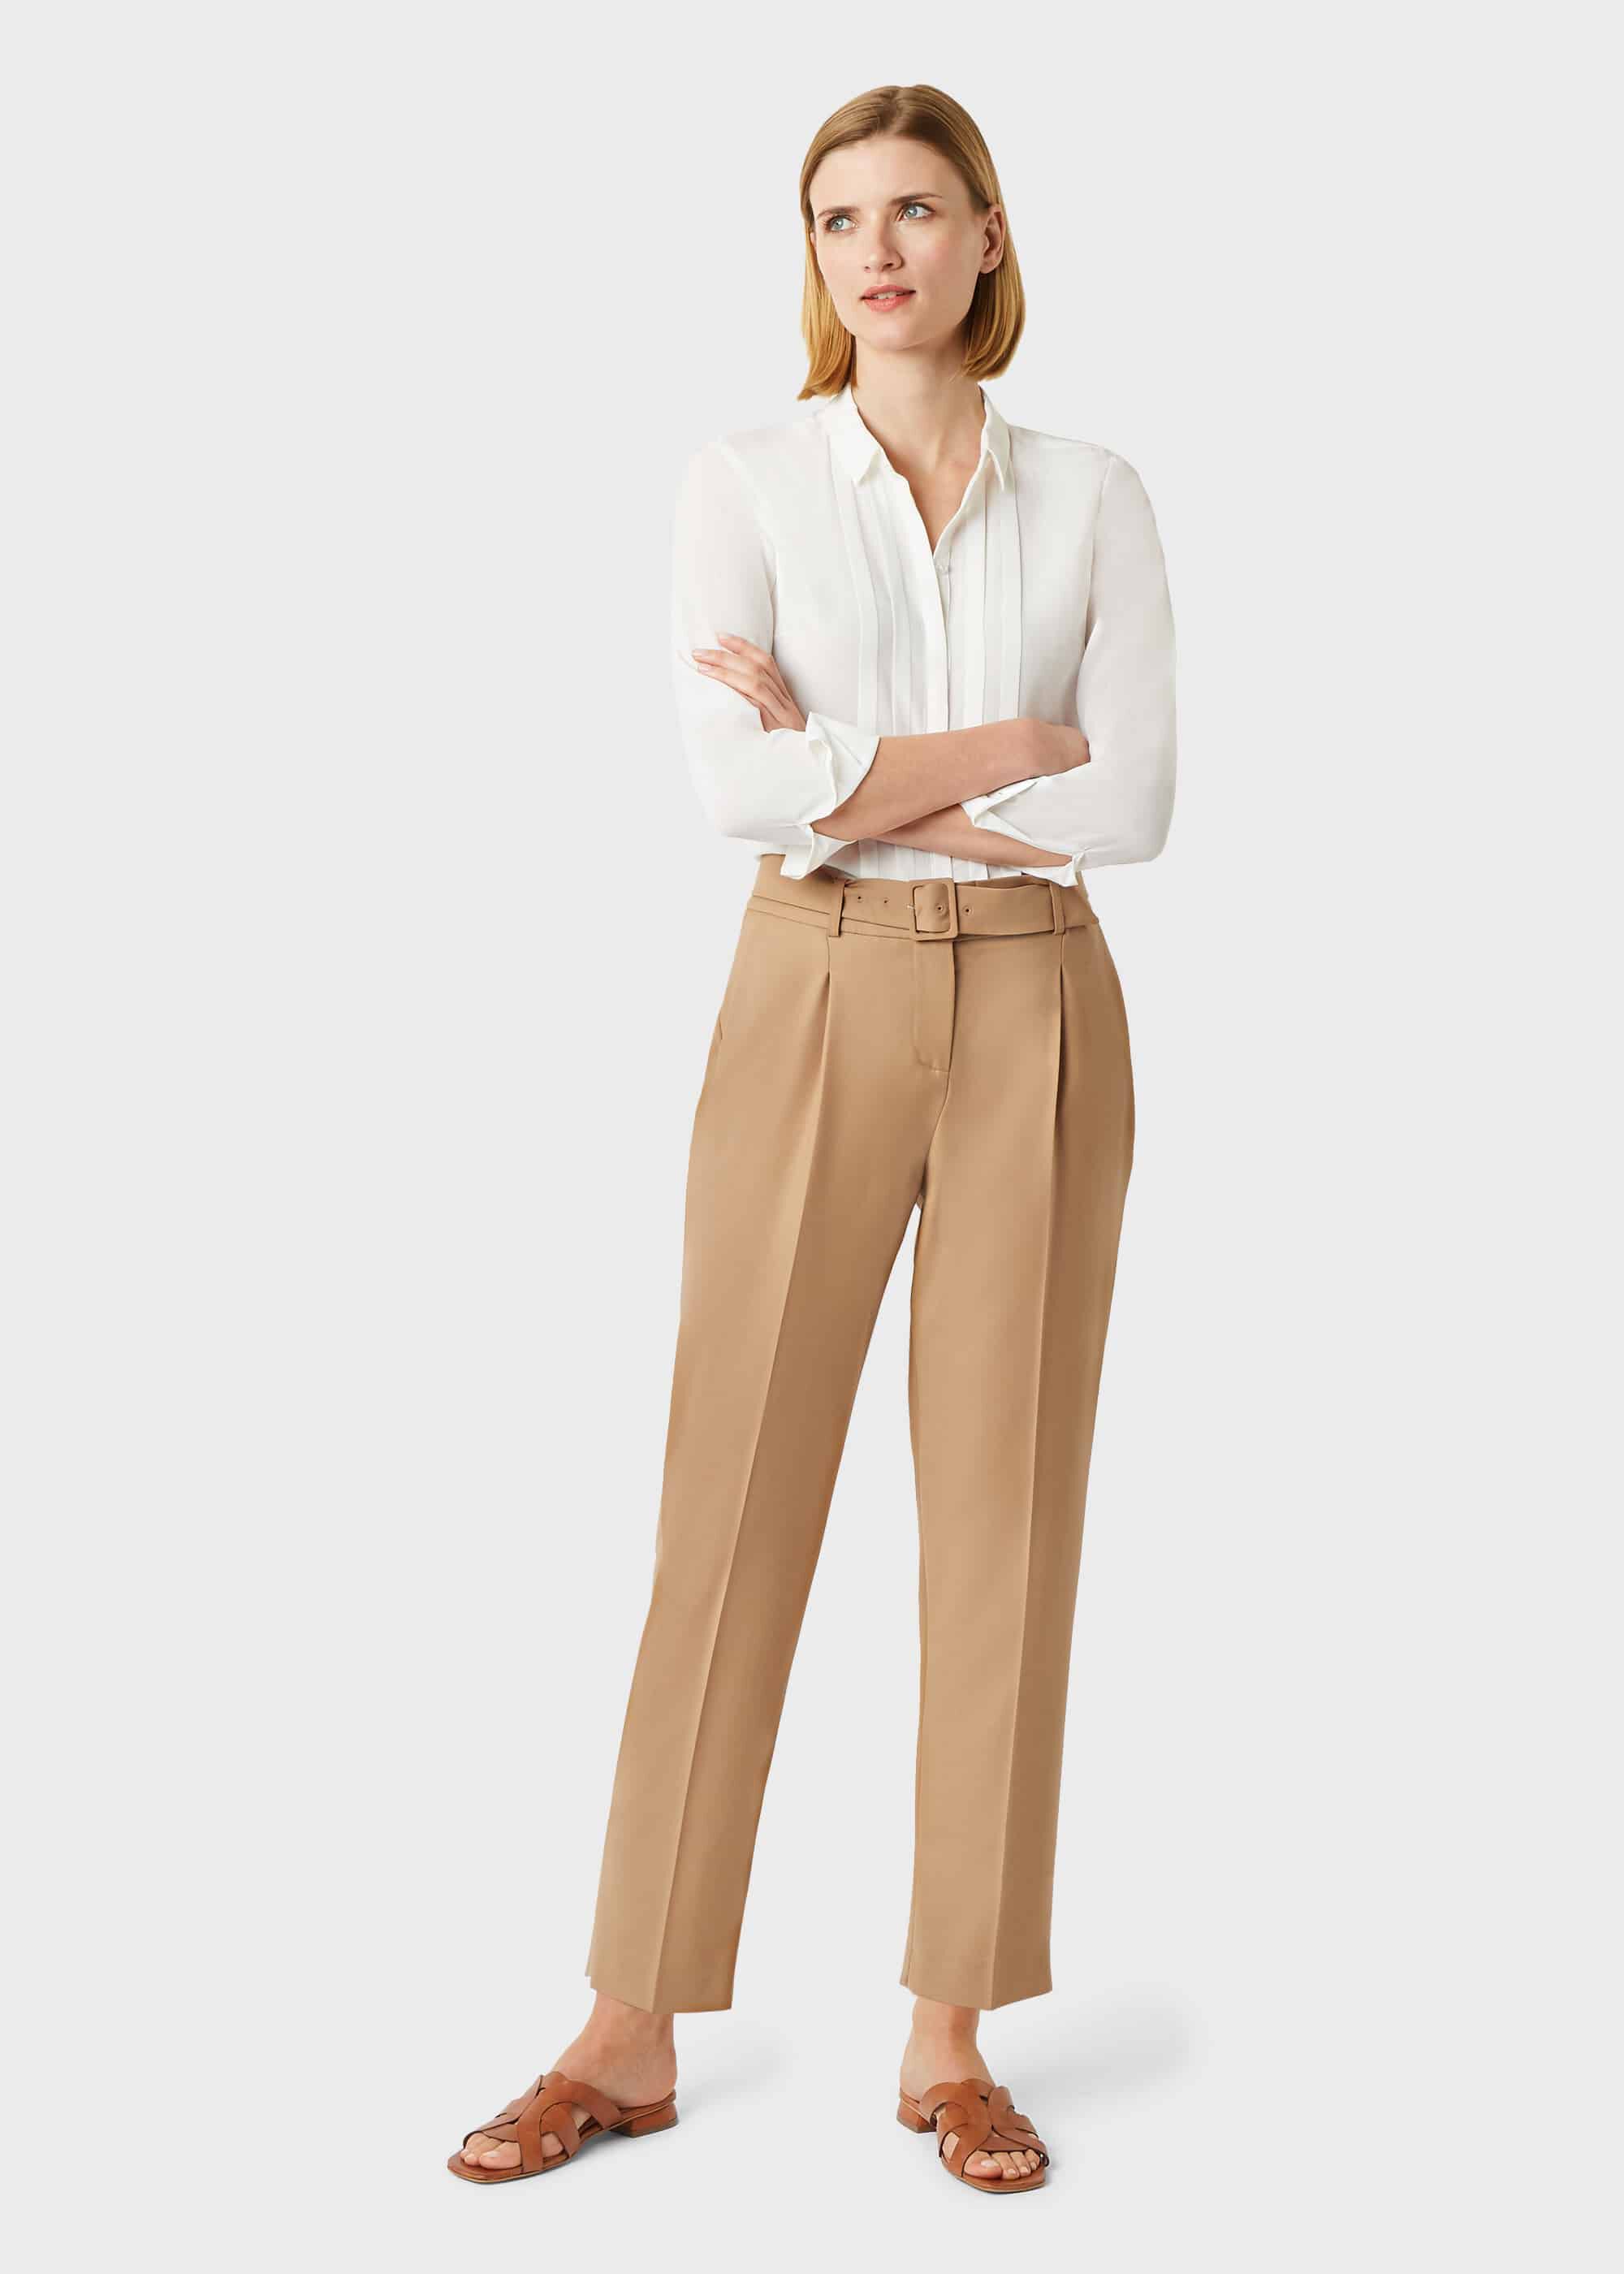 Buy FASHION CLOUD Cotton Strechable Trousers for Women Multiple Colors  Camel Brown at Amazonin